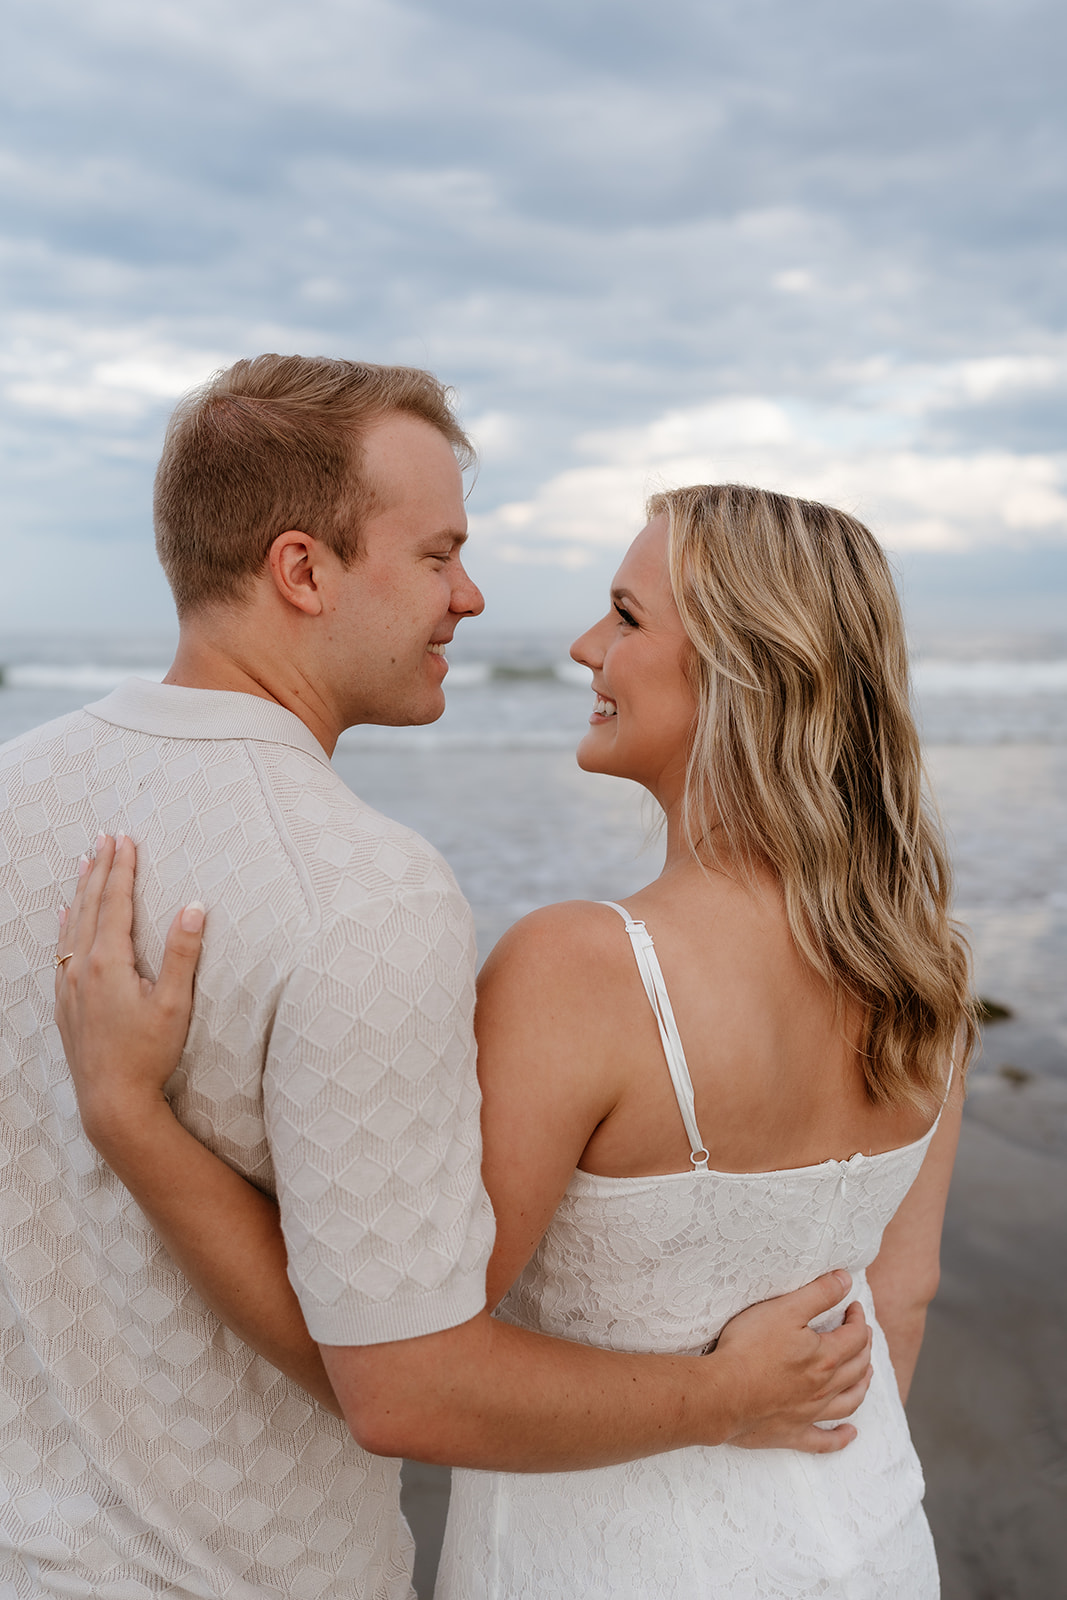 A couple holding hands and walking barefoot on a sandy beach, looking at each other, with cloudy skies in the background at their engagement session